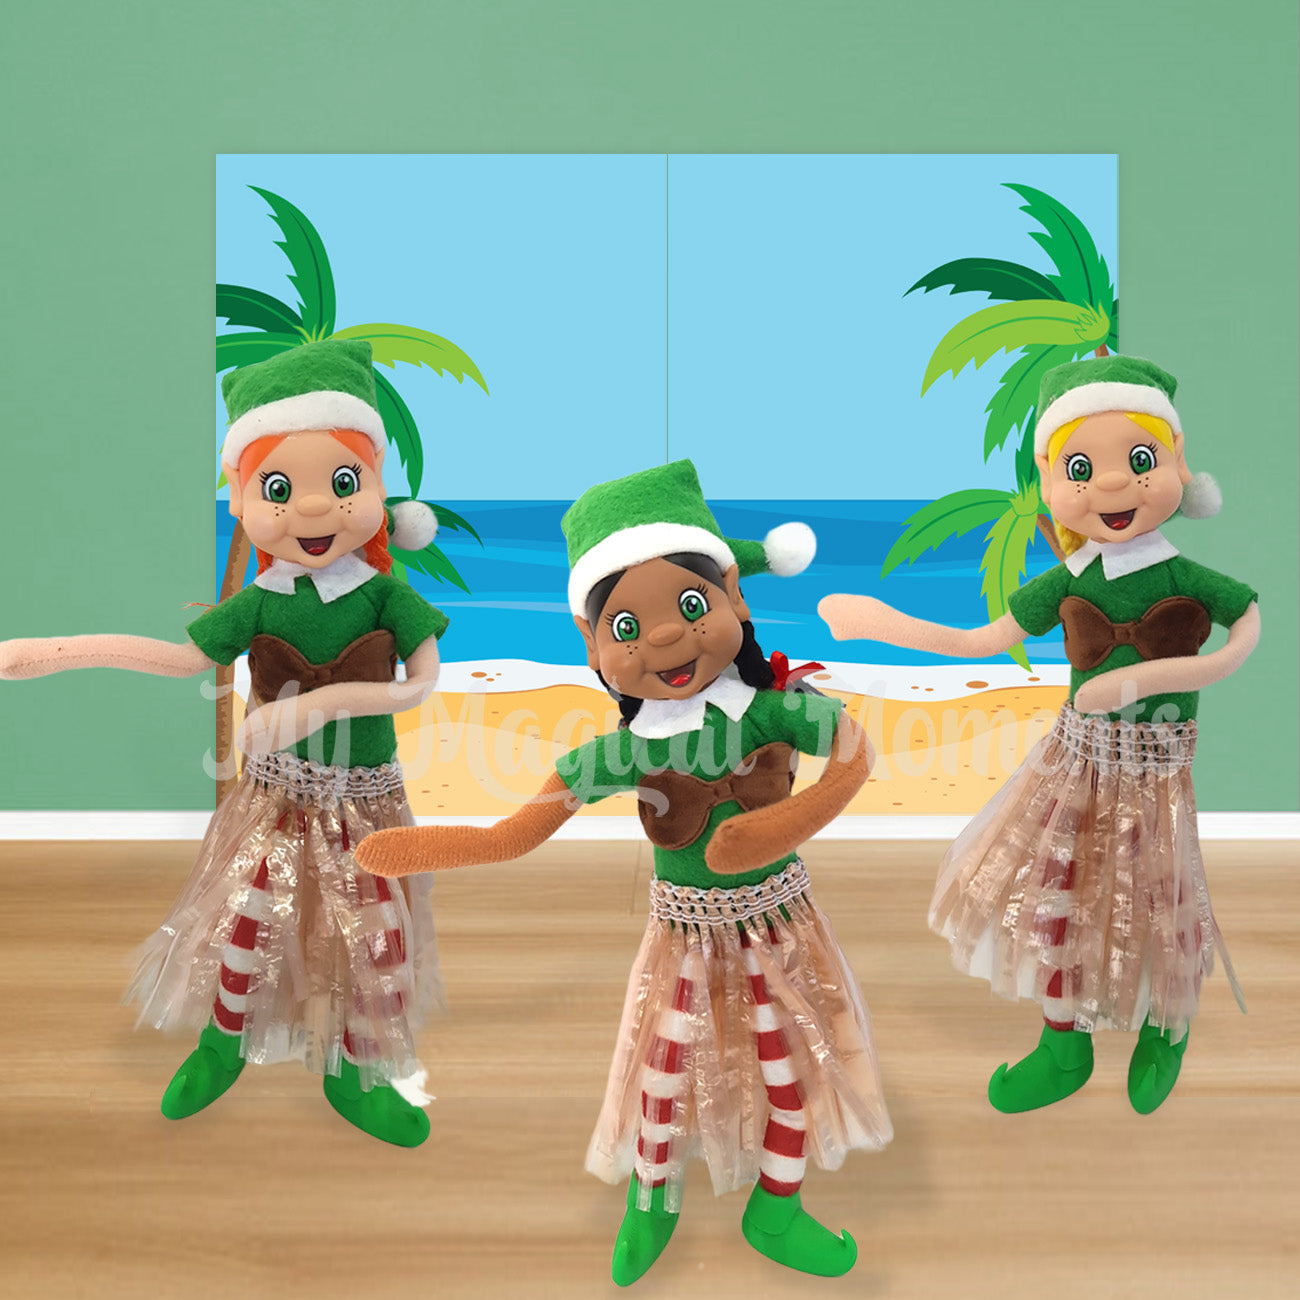 Elves doing a hula dance wearing coconut bras and grass skirts